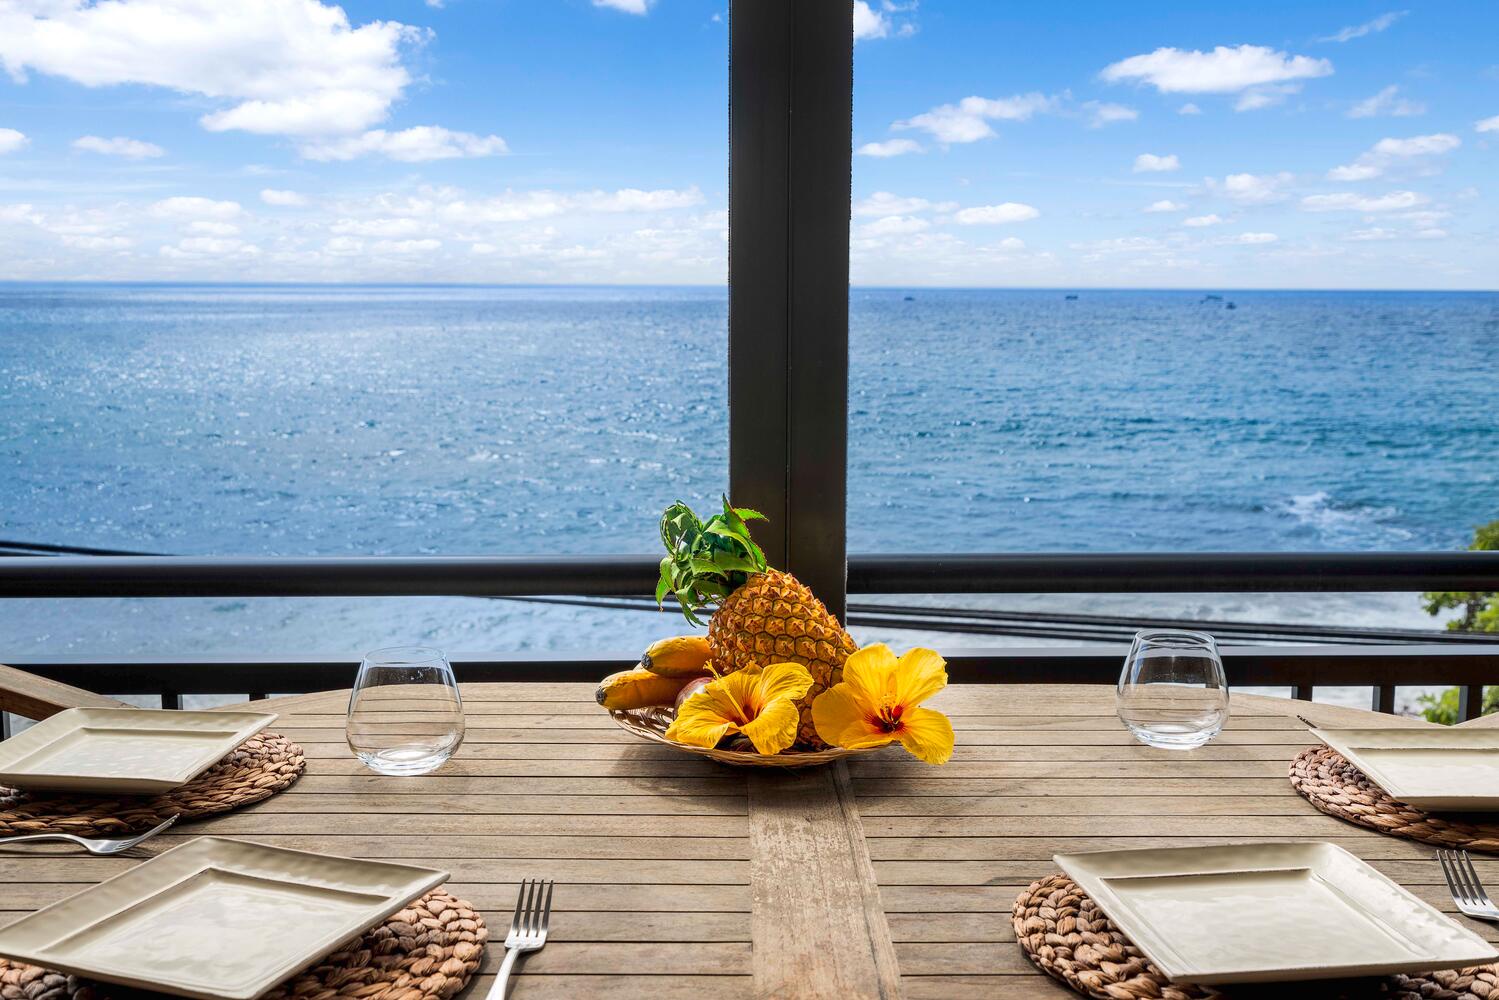 Kailua Kona Vacation Rentals, Kona Alii 302 - Dine with a view of the Pacific Ocean!